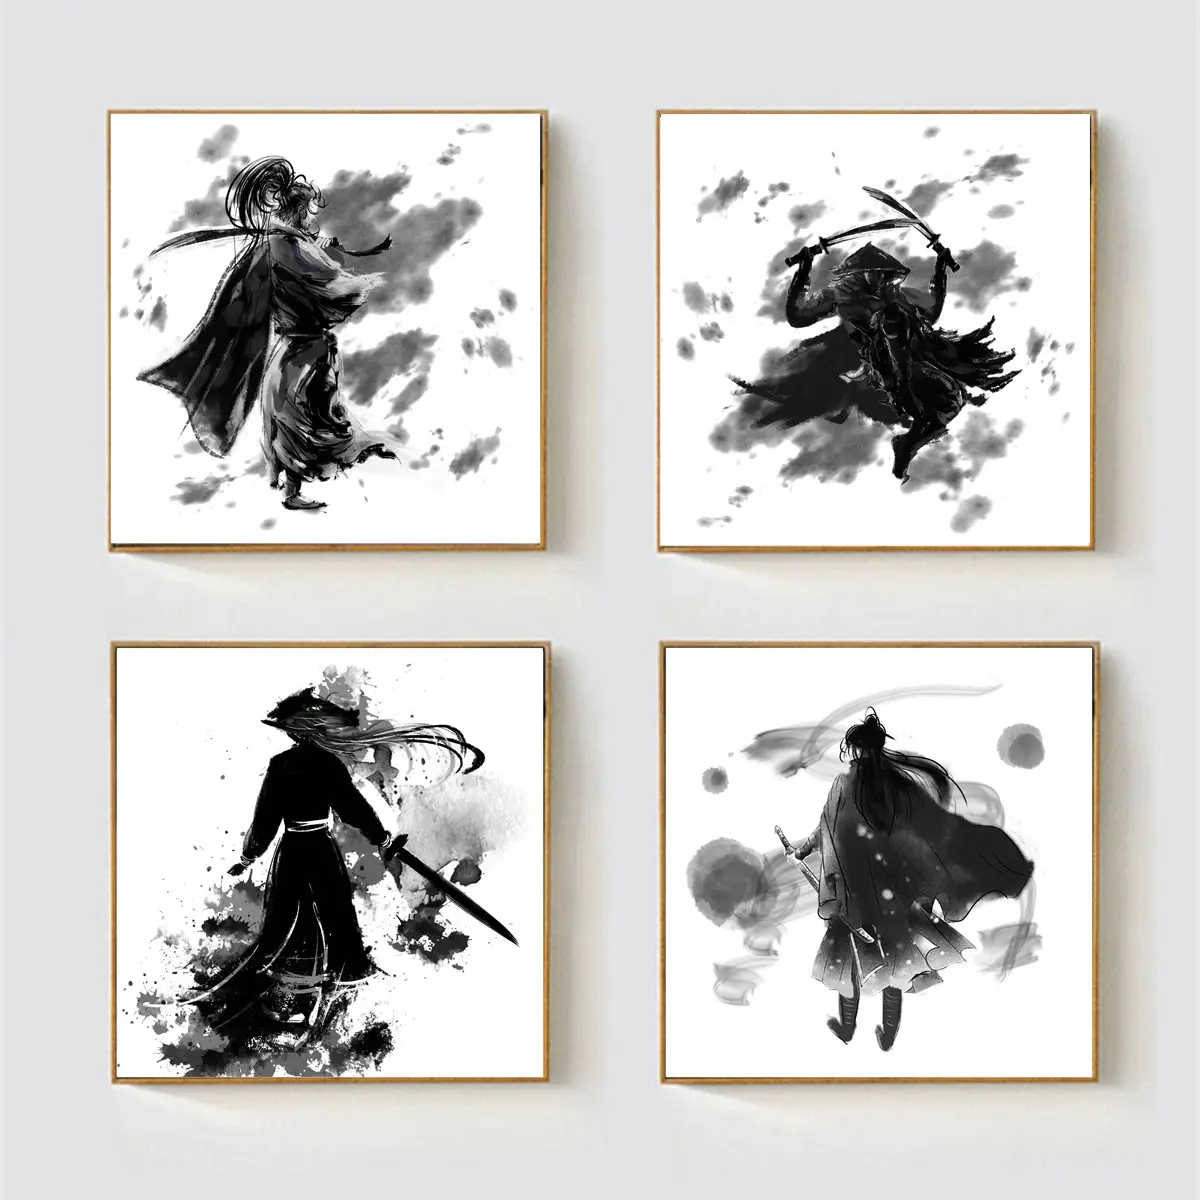 Abstract Ink Painting Swordsman Canvas Poster Wall Picture Room Decor Art Print